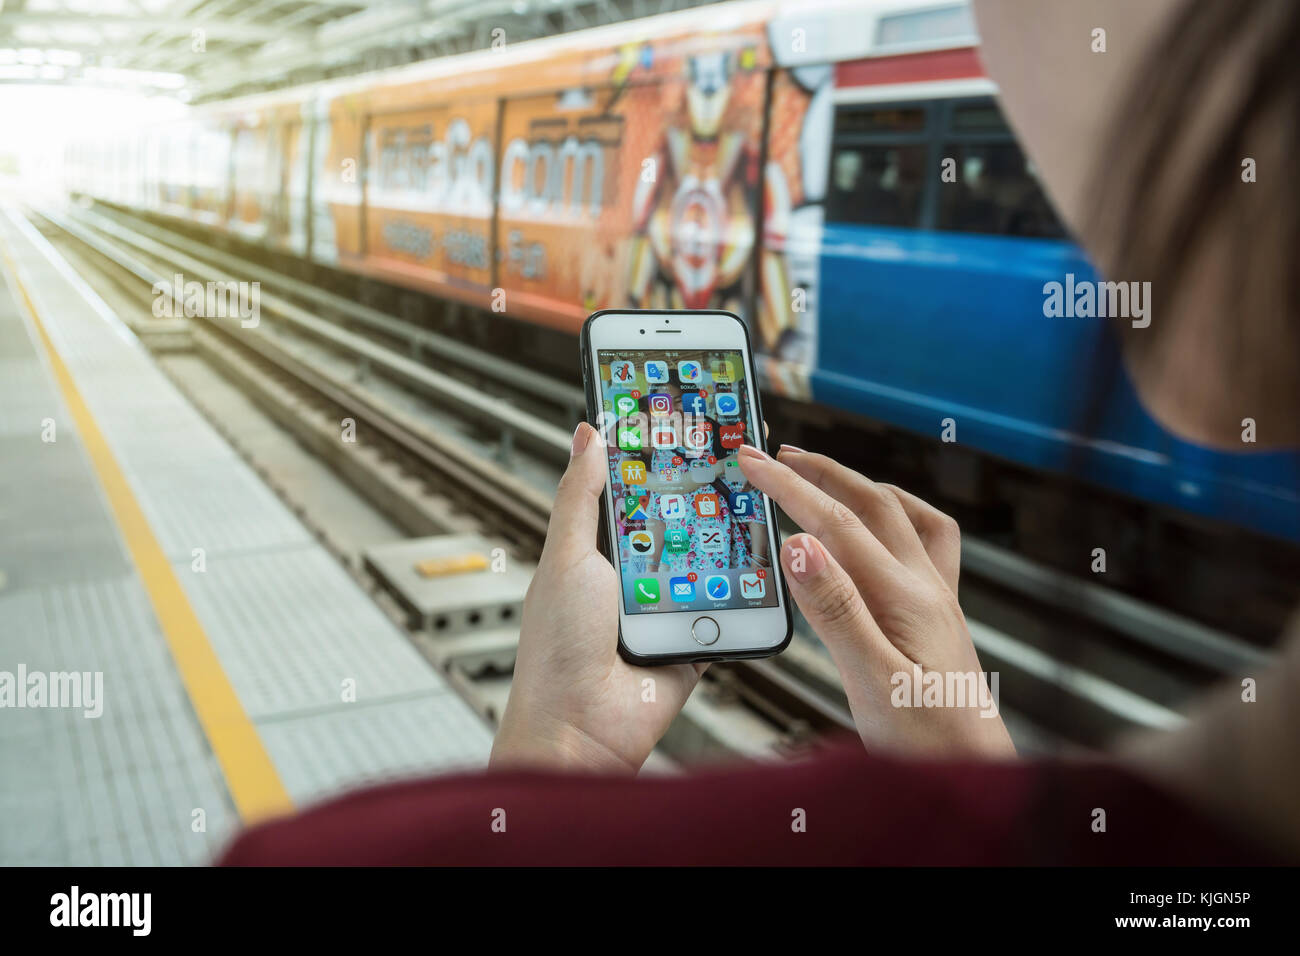 BANGKOK, THAILAND - JUNE 2, 2016: Closeup rear view of woman hand in Iphone6 white color on the application screen in the BTS Skytrain rails for trave Stock Photo